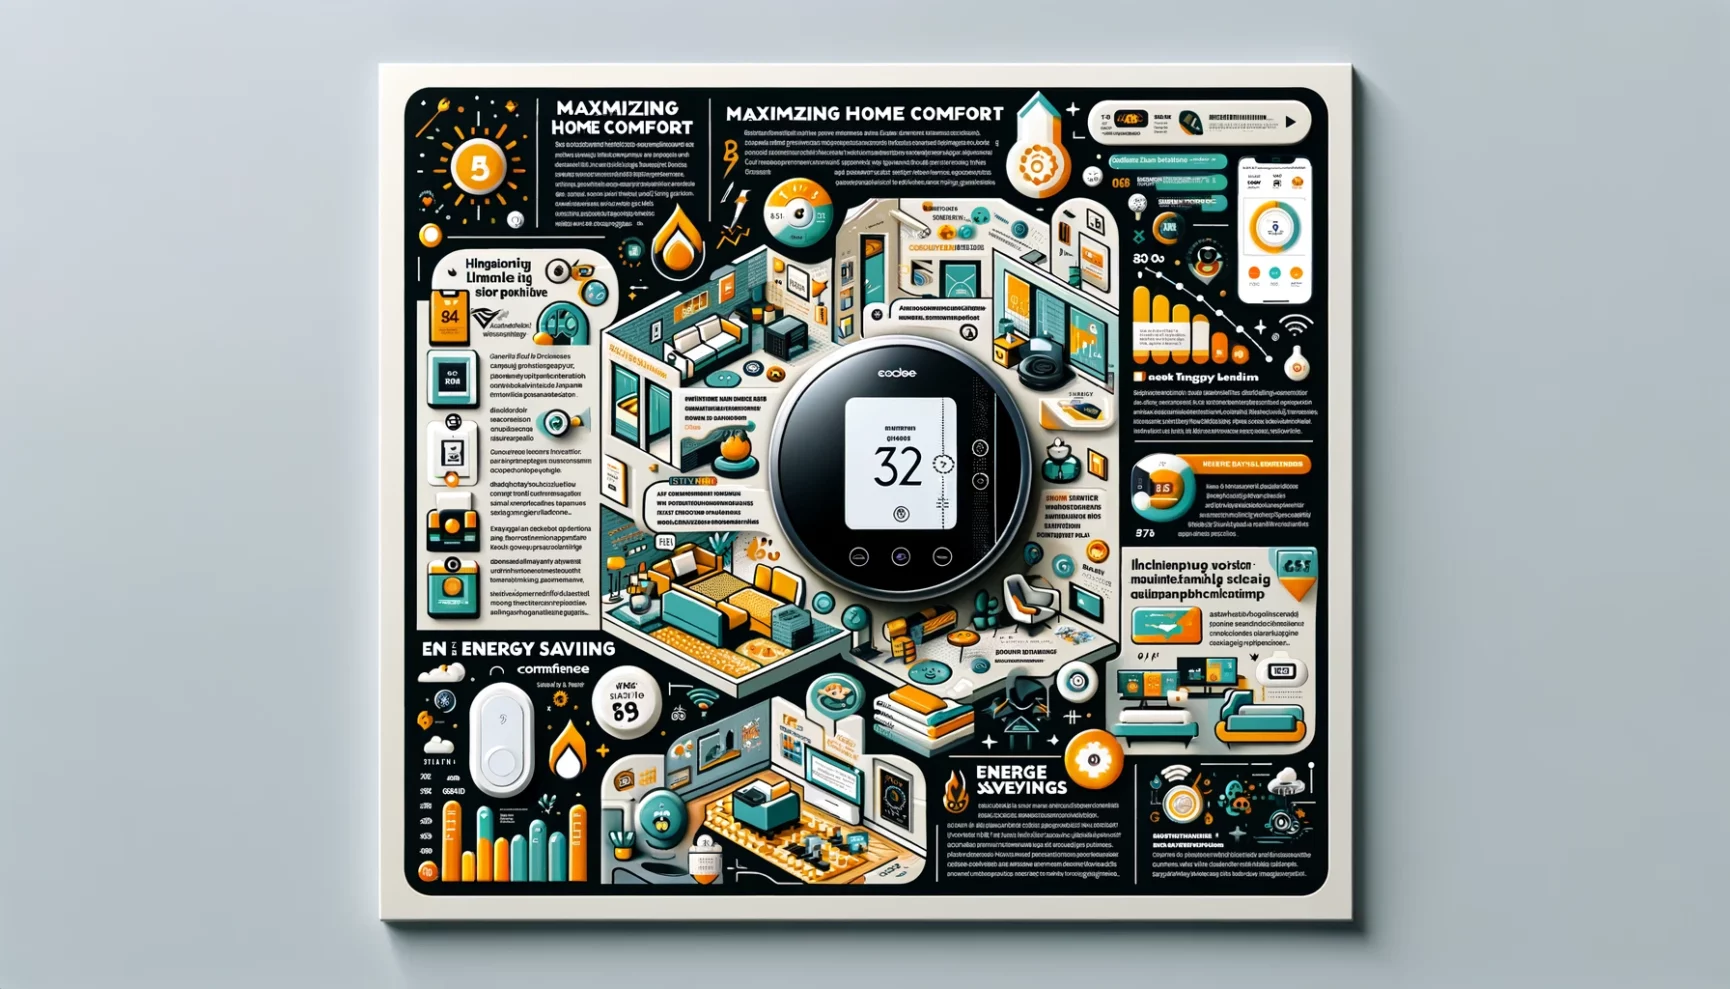 Illustrated guide to maximizing home comfort with a smart thermostat and various energy-saving tips.